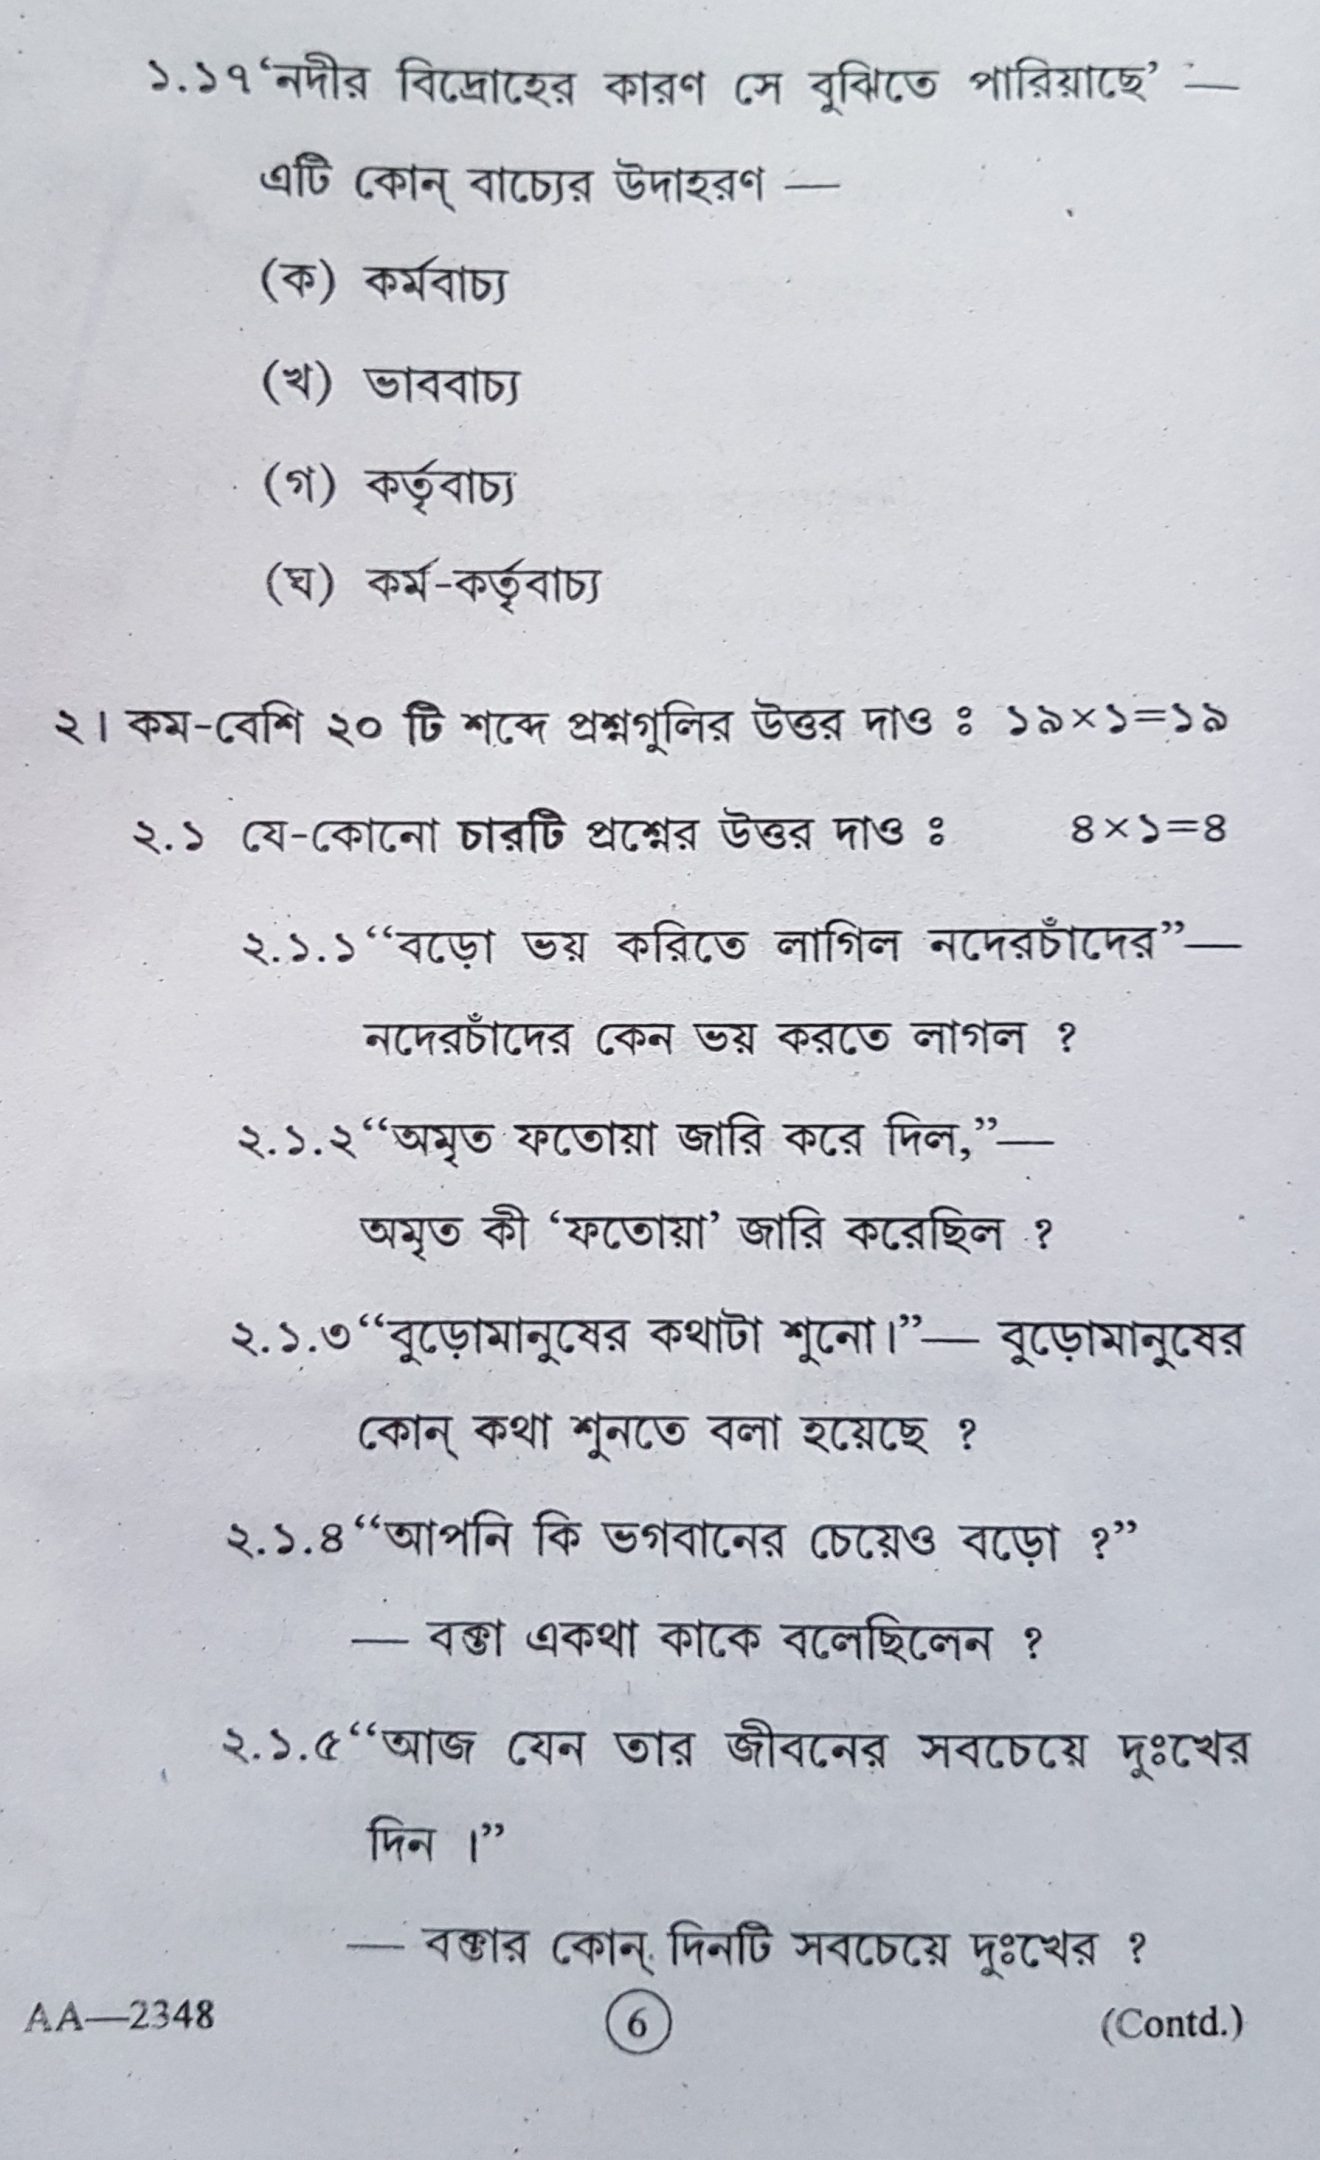 west-bengal-board-sample-question-paper-for-class-11-political